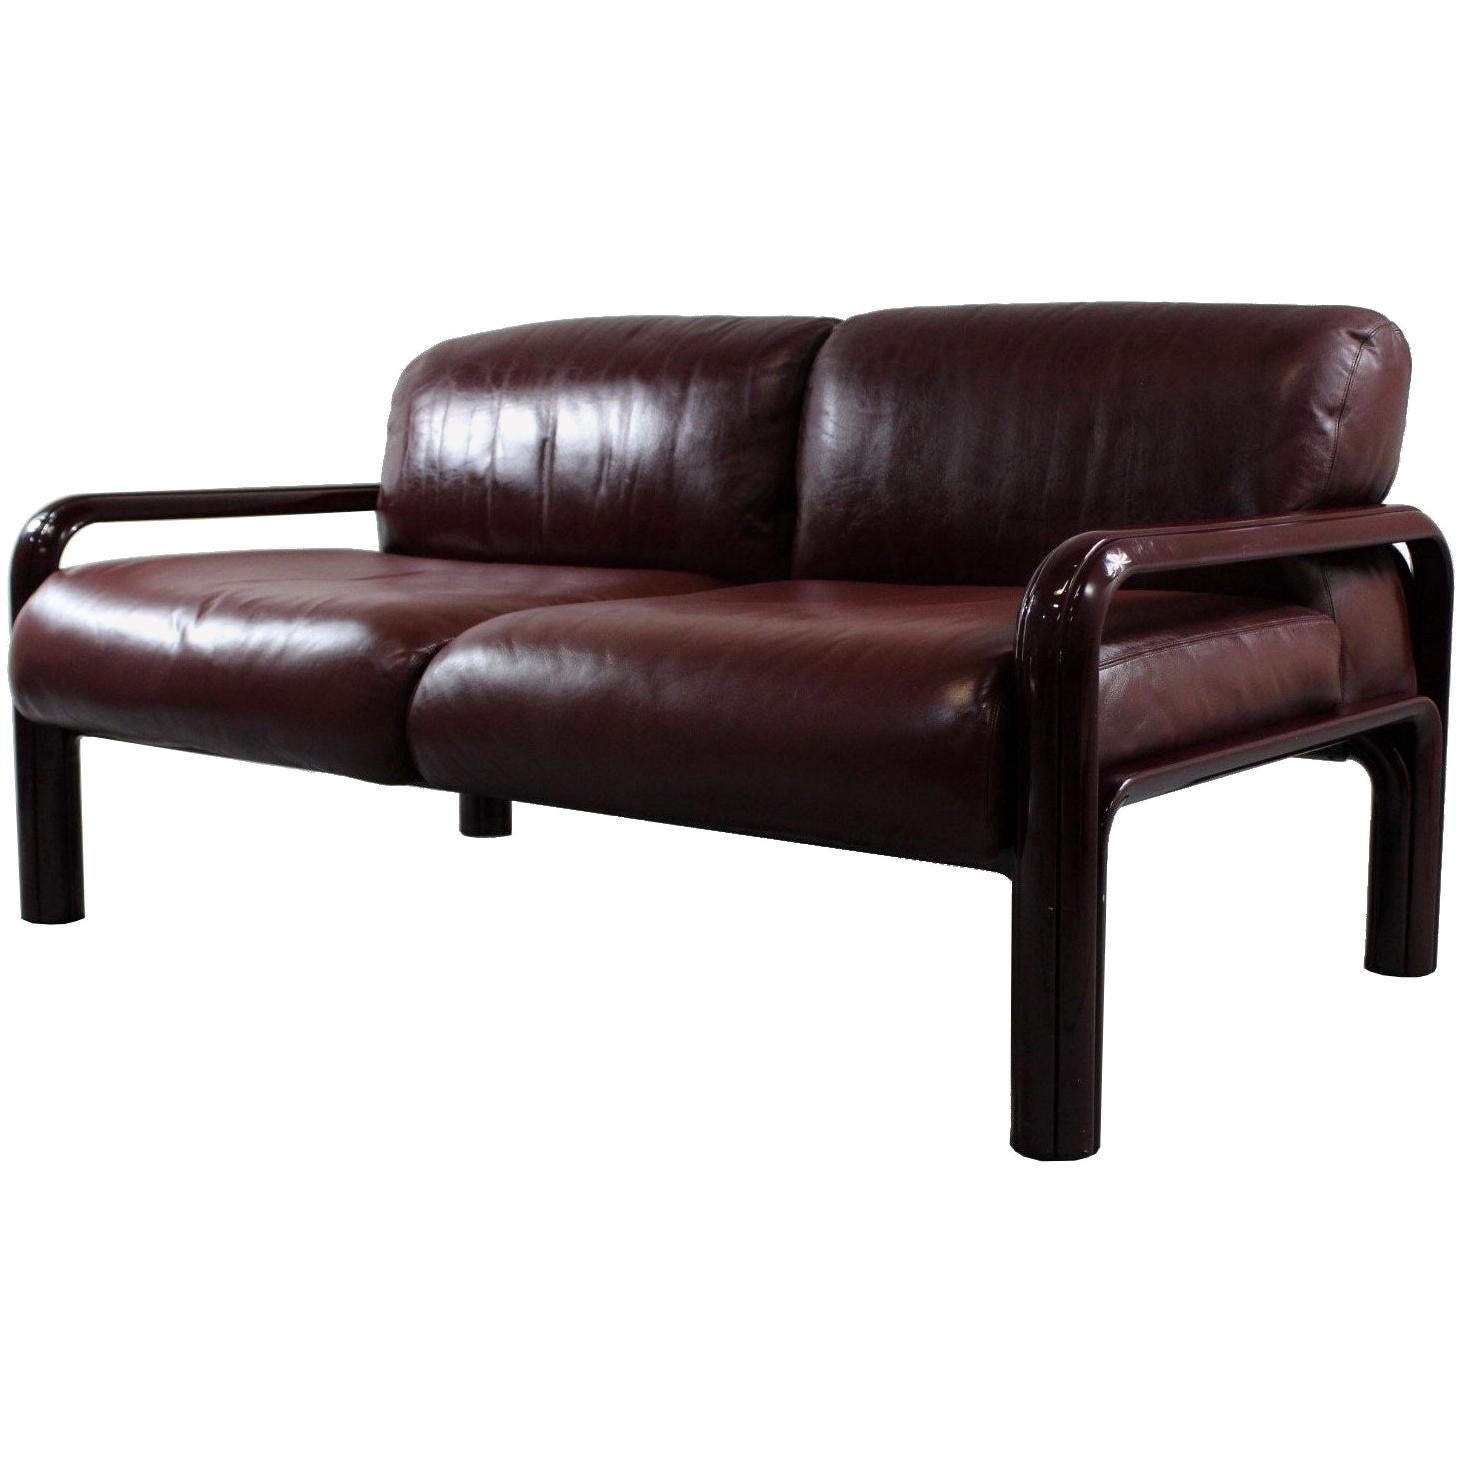 1970s Gae Aulenti Two-Seat Leather Sofa for Knoll